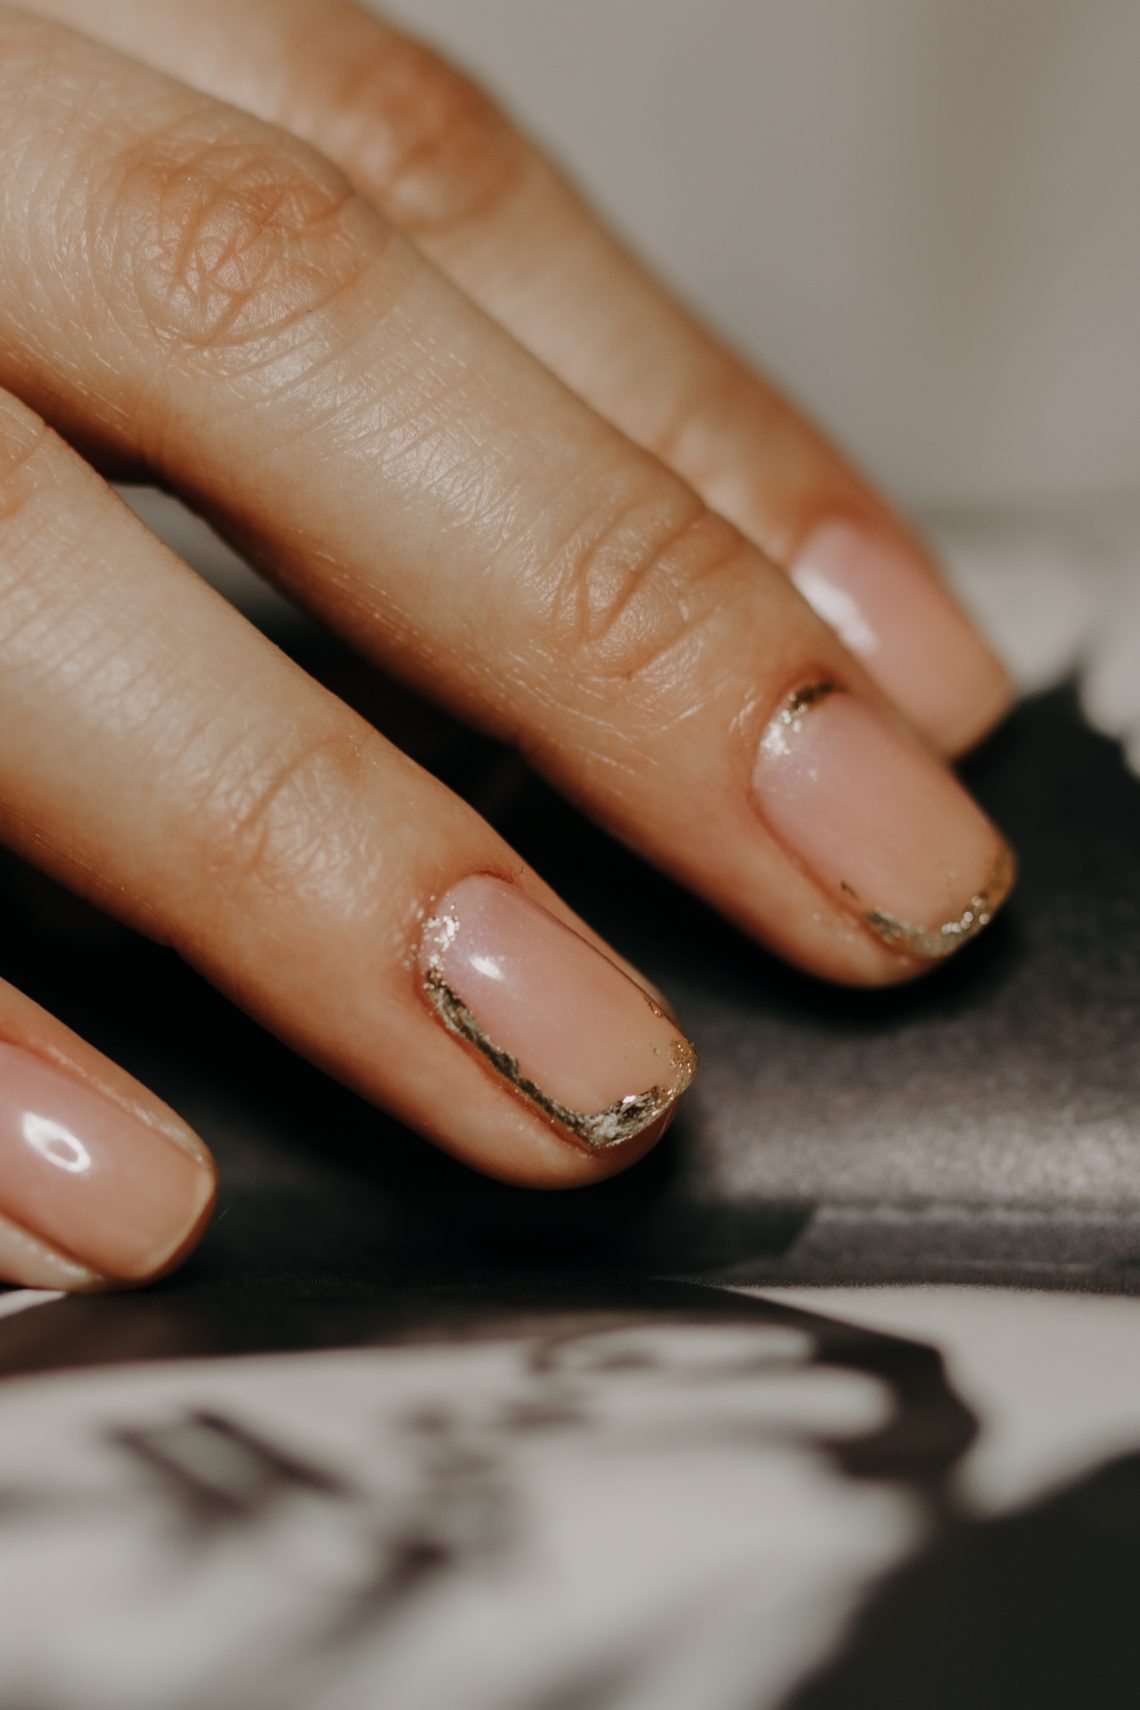 Beauty Update: Nail Trends 2020